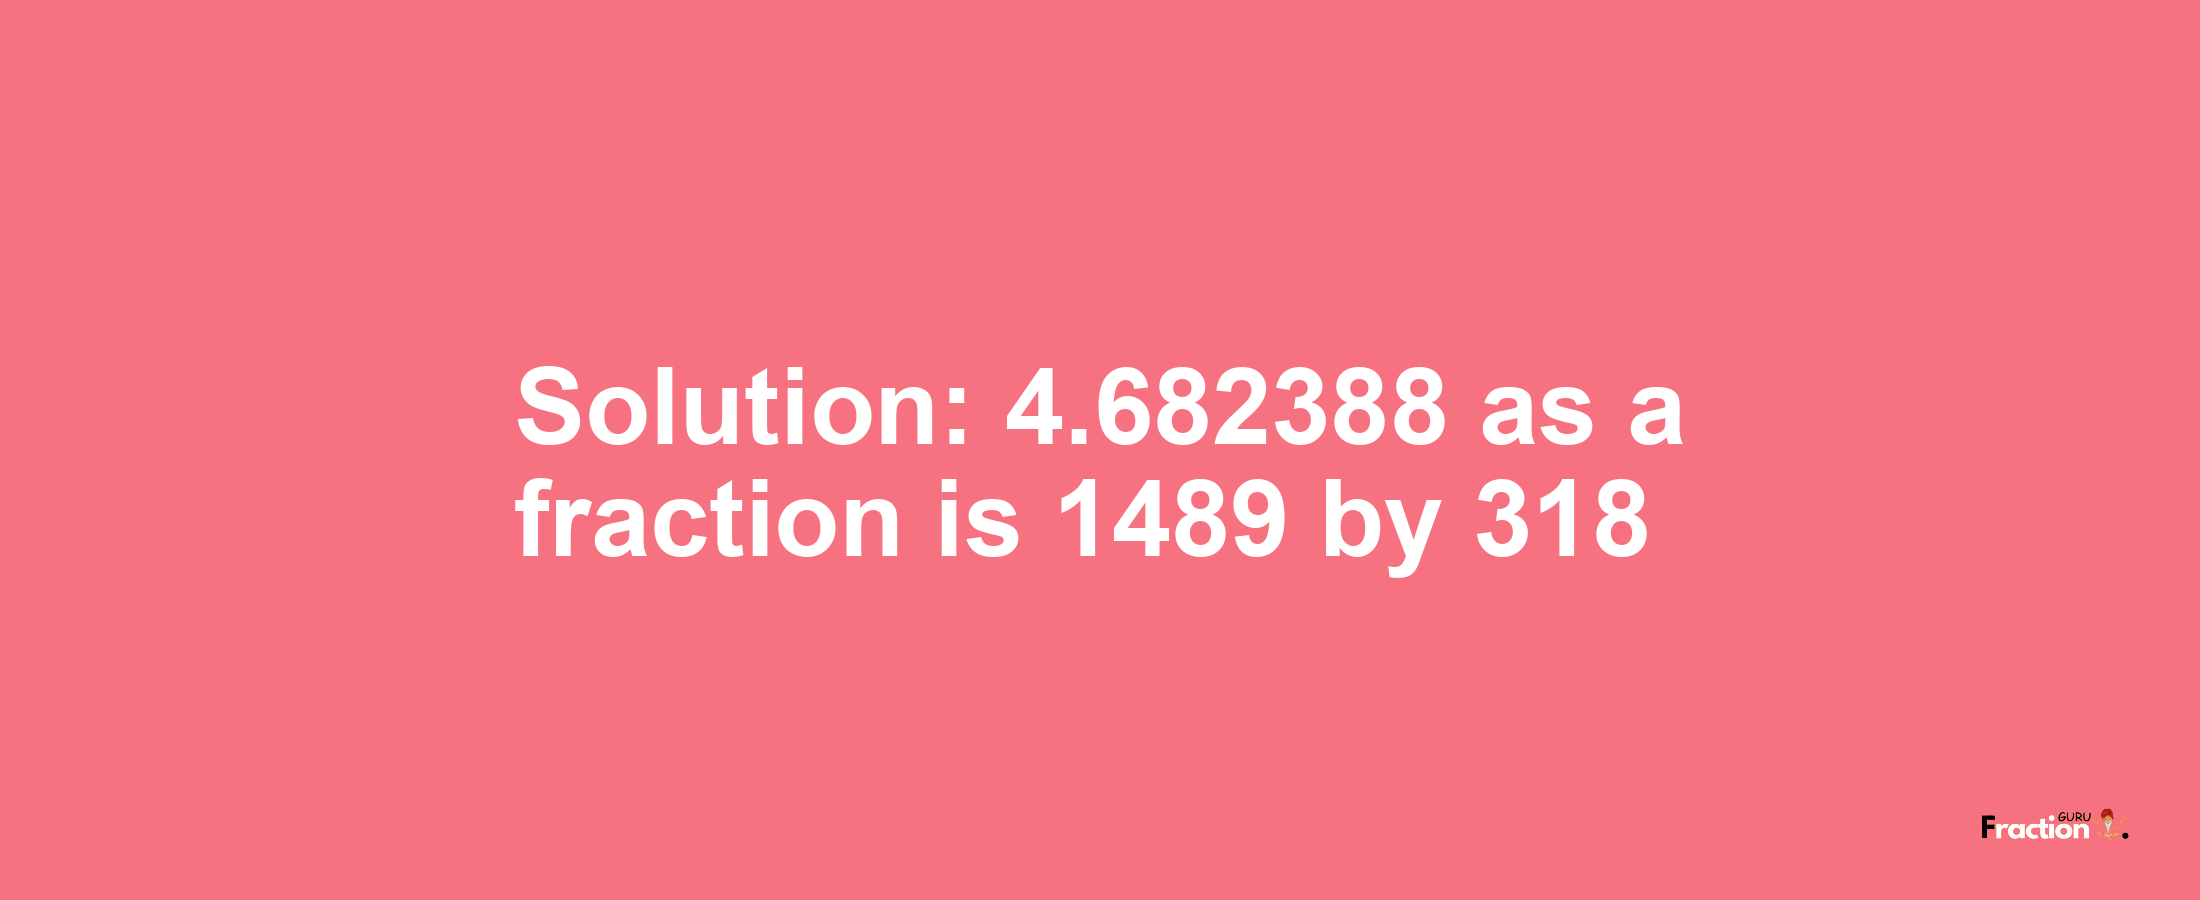 Solution:4.682388 as a fraction is 1489/318